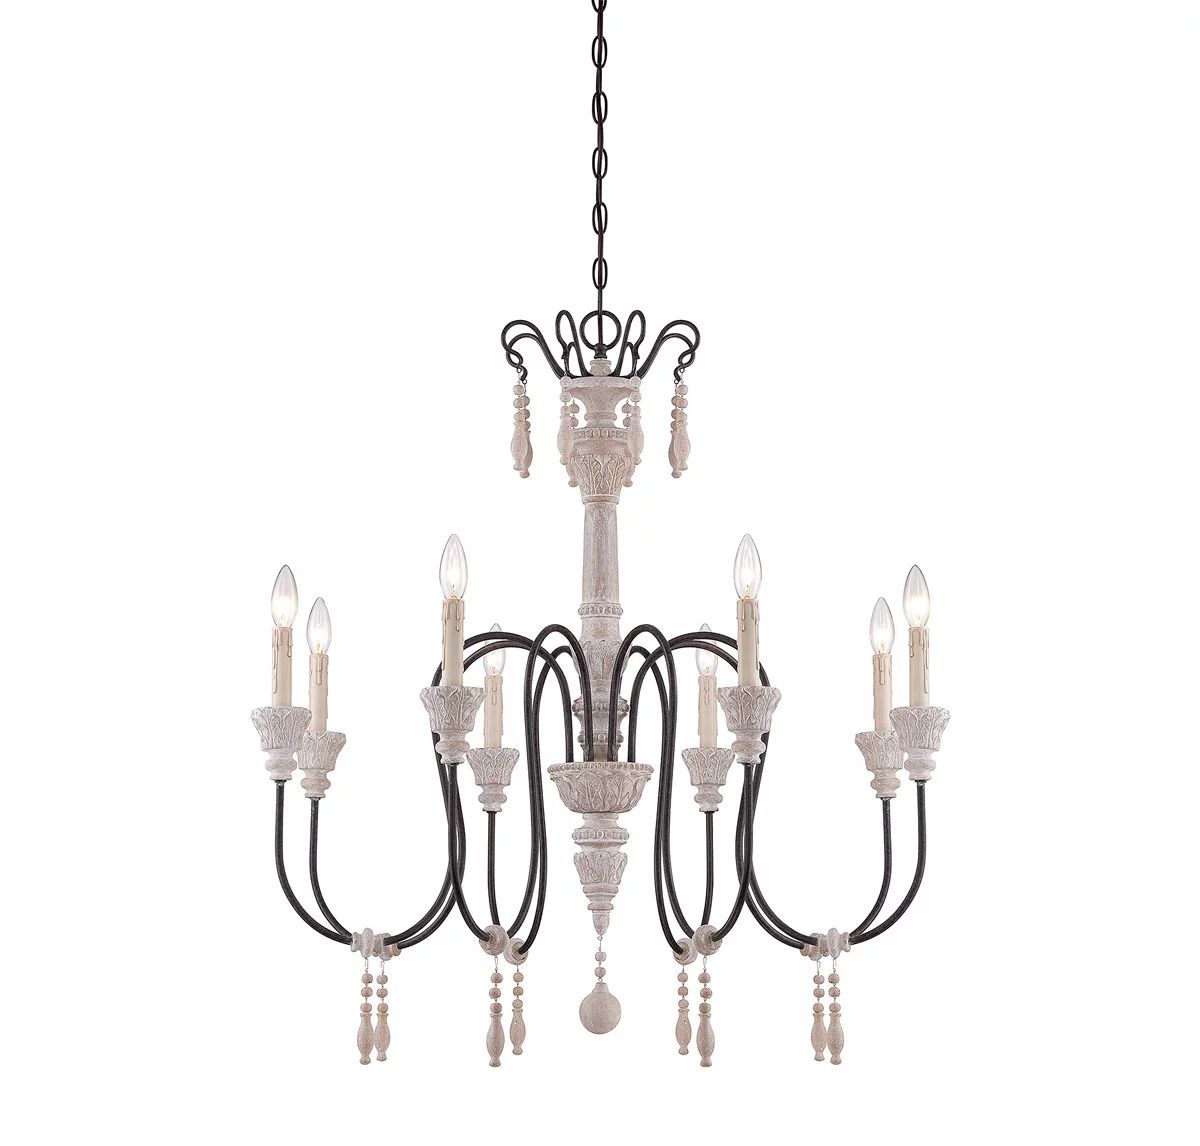 Chandeliers 8 Light With White Washed Driftwood Finish Candelabra Bulbs 33 inch 480 Watts | Walmart (US)